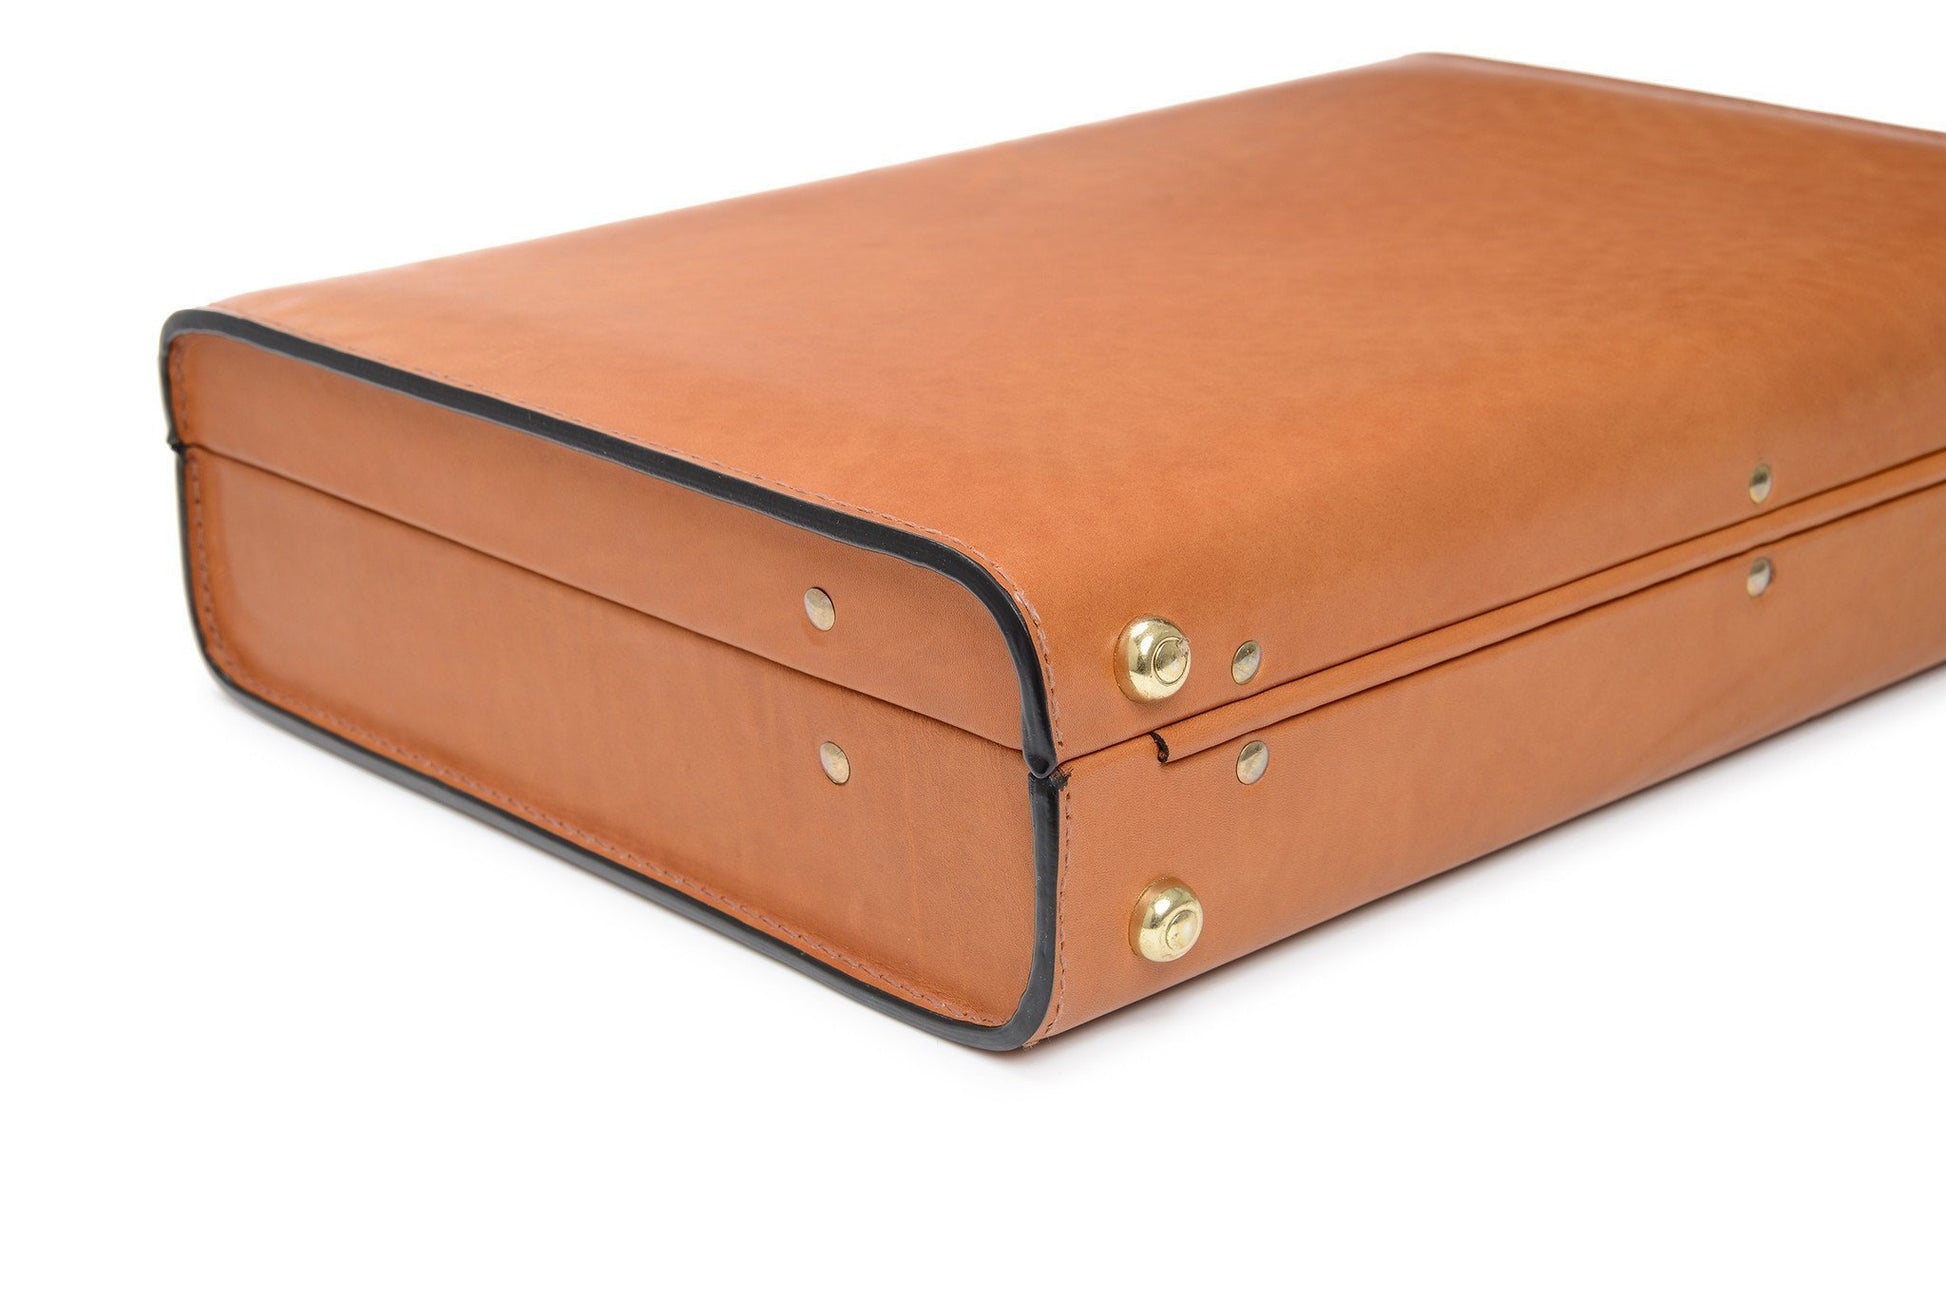 Attache Case | American Belting Leather | Monroe Classic | 4 Inch Leather Attache Brief Case | Monogram with Initials | Korchmar | Tan or Black-Attache-Sterling-and-Burke